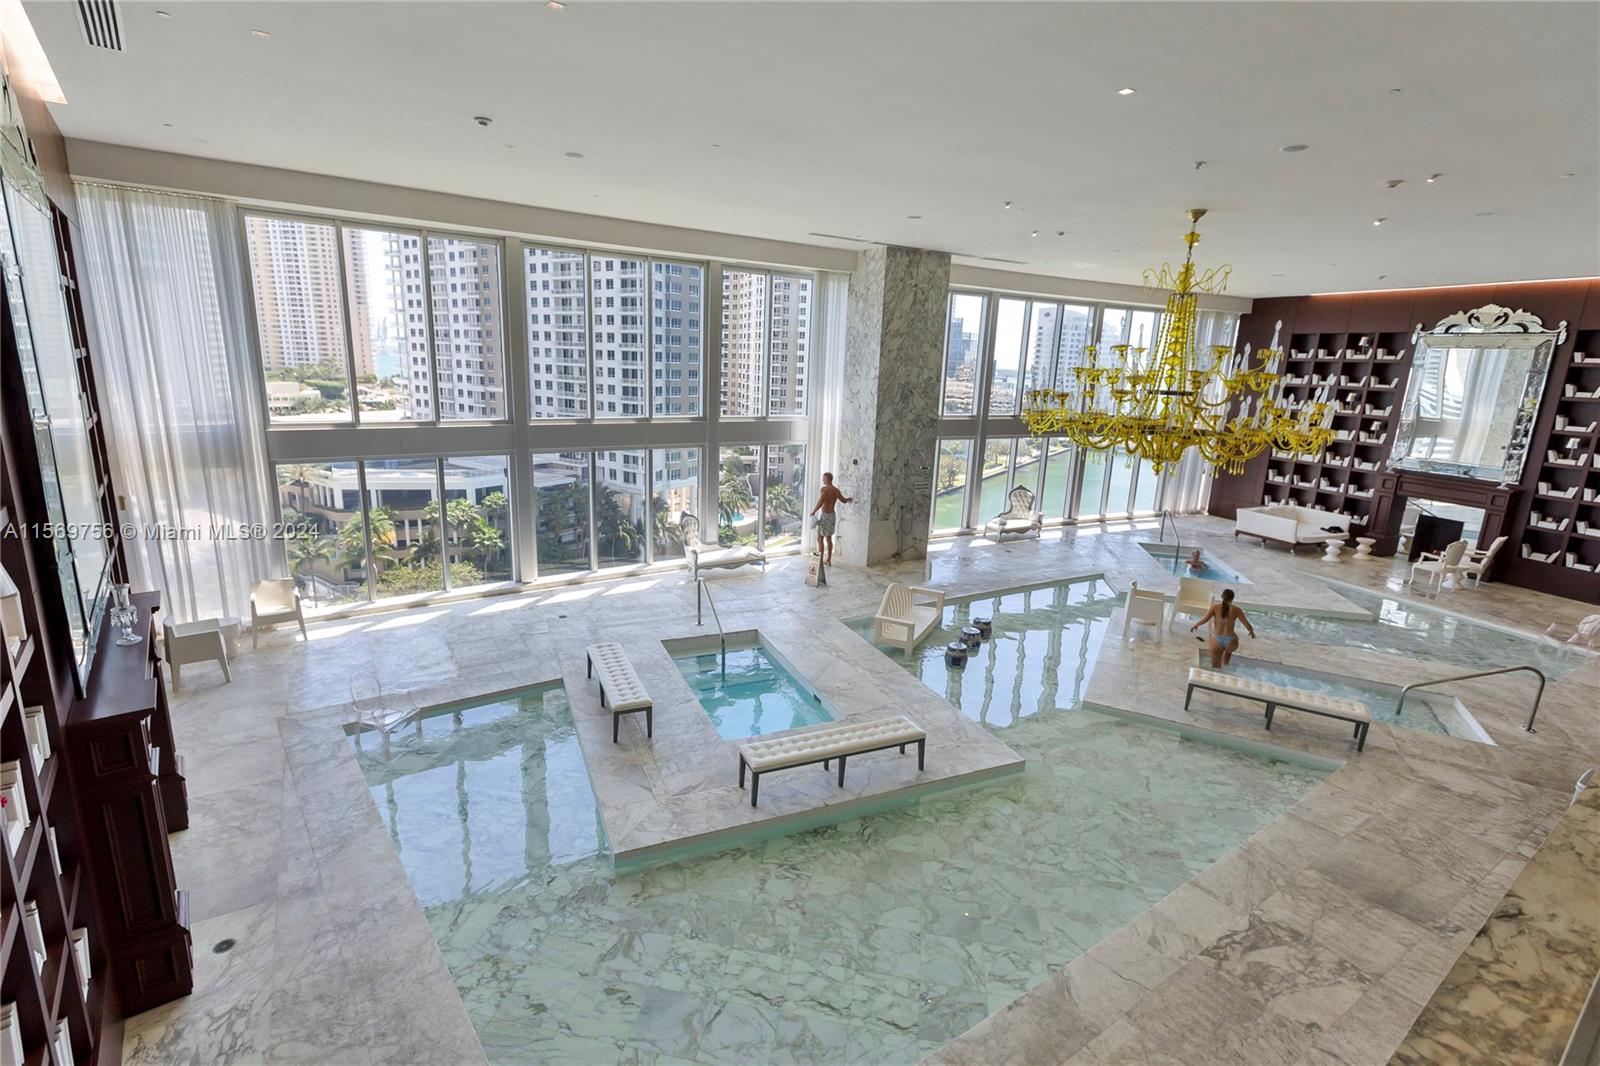 Discover luxury living in Brickell's Icon Building with this waterfront studio! Enjoy impeccable interiors and stunning views. Dive into a supersized pool or relax on the deck overlooking Biscayne Bay. Indulge in a spa and fitness center that rivals five-star resorts, complete with three whirlpool tubs and cold plunge pools, steam room and redwood saunas… a full wellness facility. Walk, jog, or unwind in adjacent parks or the sprawling two-acre terrace above the bay, featuring a 300-foot pool, hot tub, and outdoor fireplace. Two bayside restaurants, 24-hour concierge, and the parking in the same level of the condo enhancing your vibrant urban lifestyle. Your new home offers breathtaking views of downtown Miami and beyond.